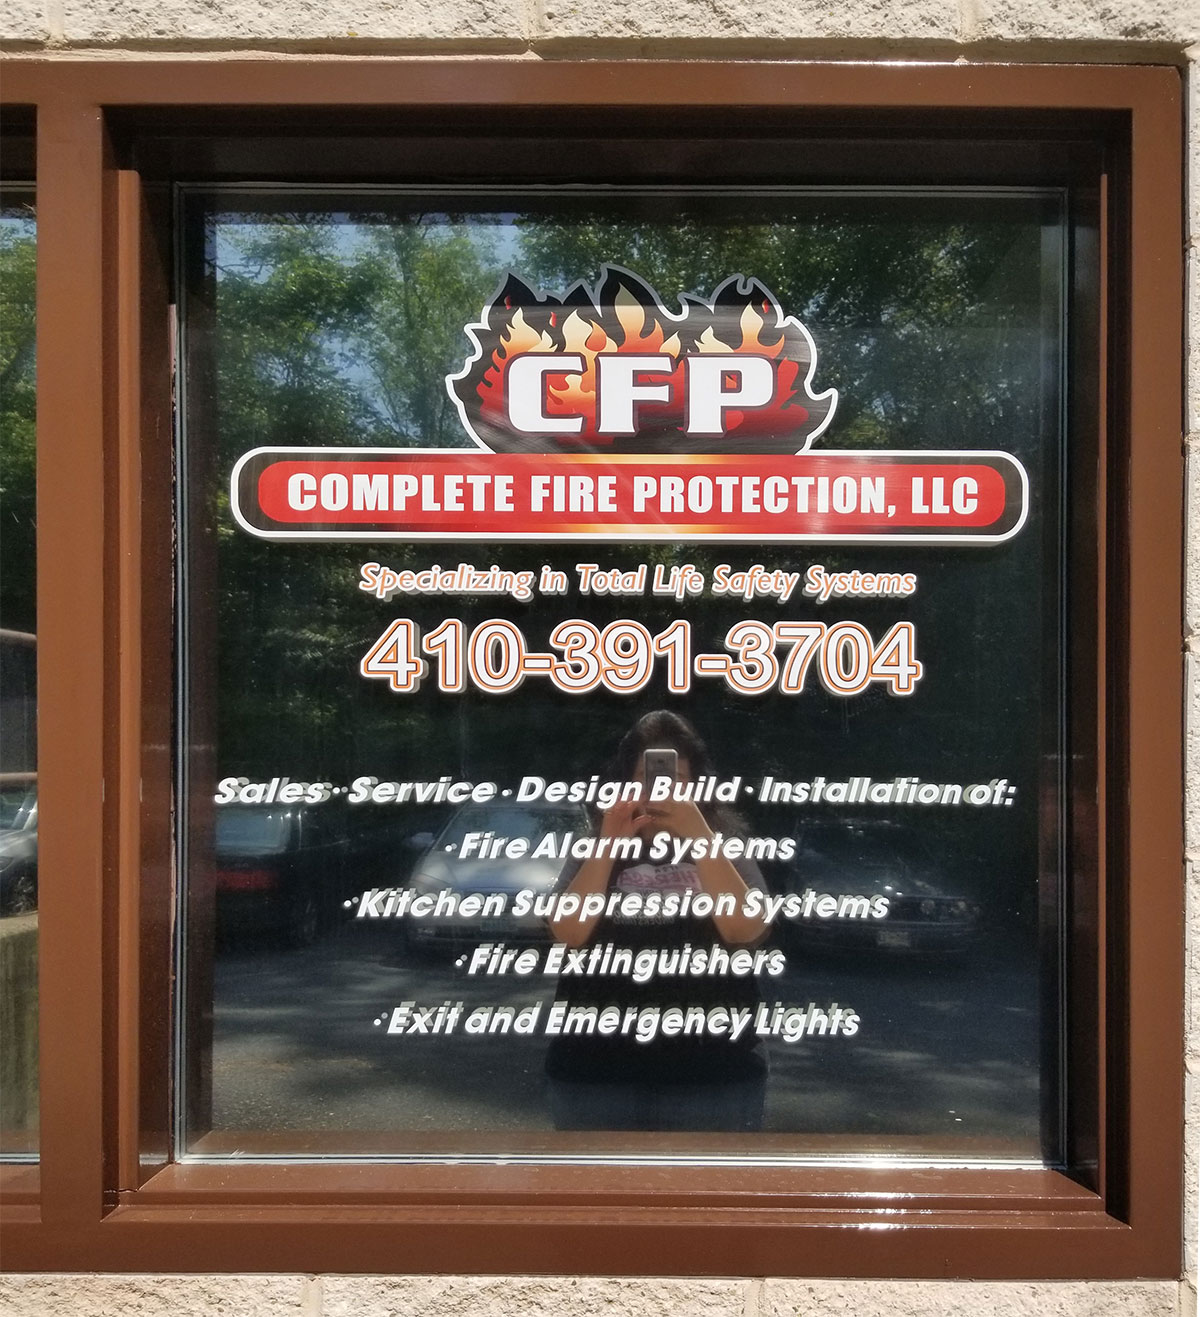 Complete Fire Protection, LLC 1107 Middle River Rd, Middle River Maryland 21220